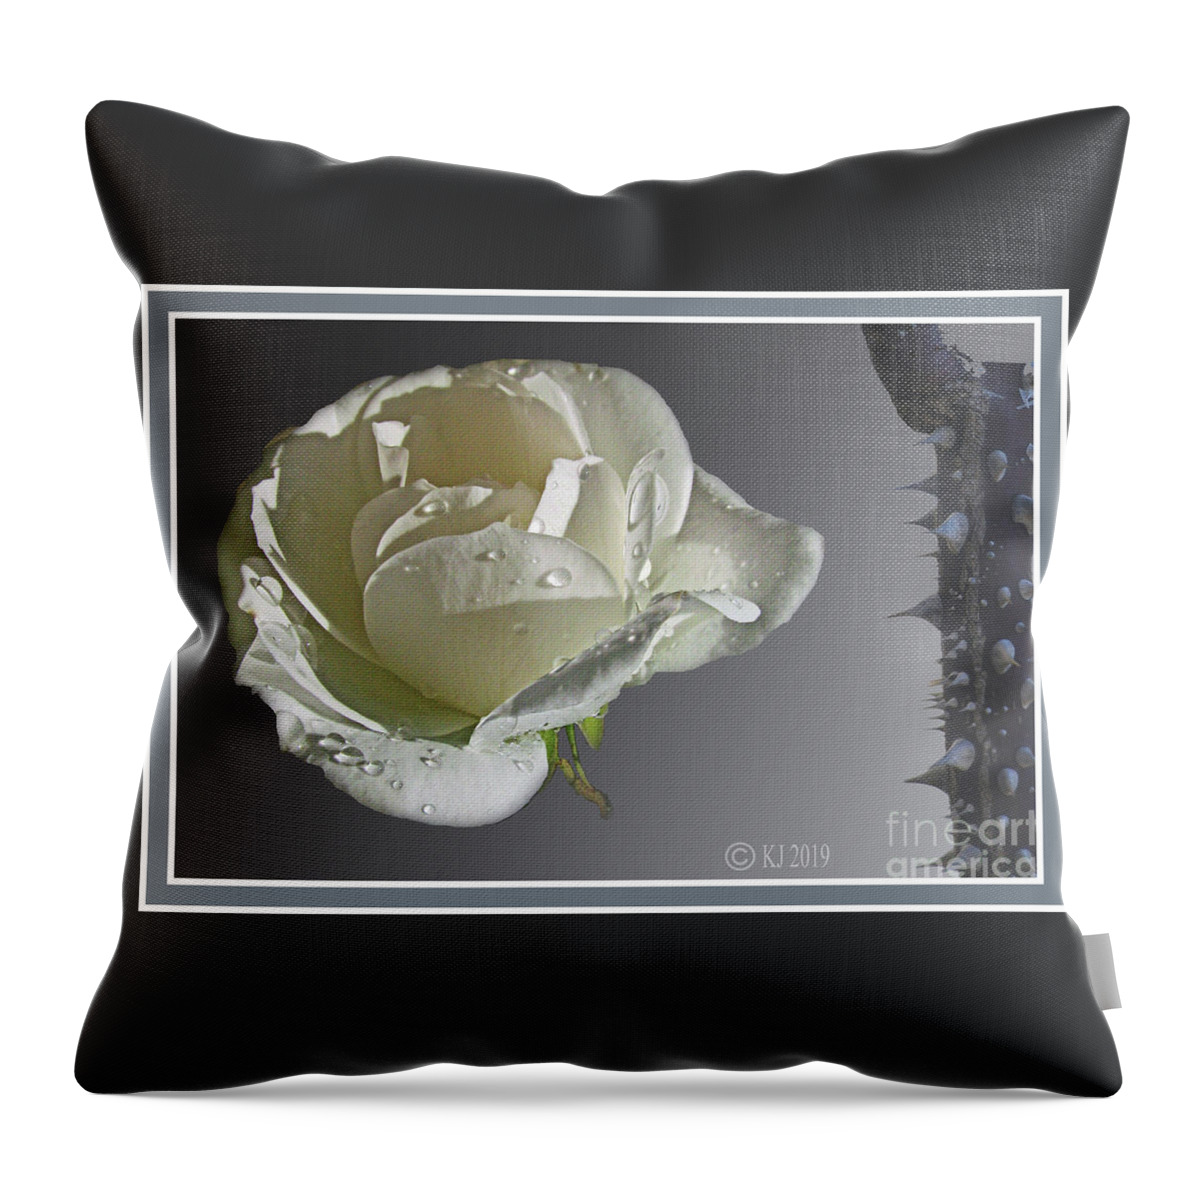 Fllowers Throw Pillow featuring the digital art The Thorns by Klaus Jaritz